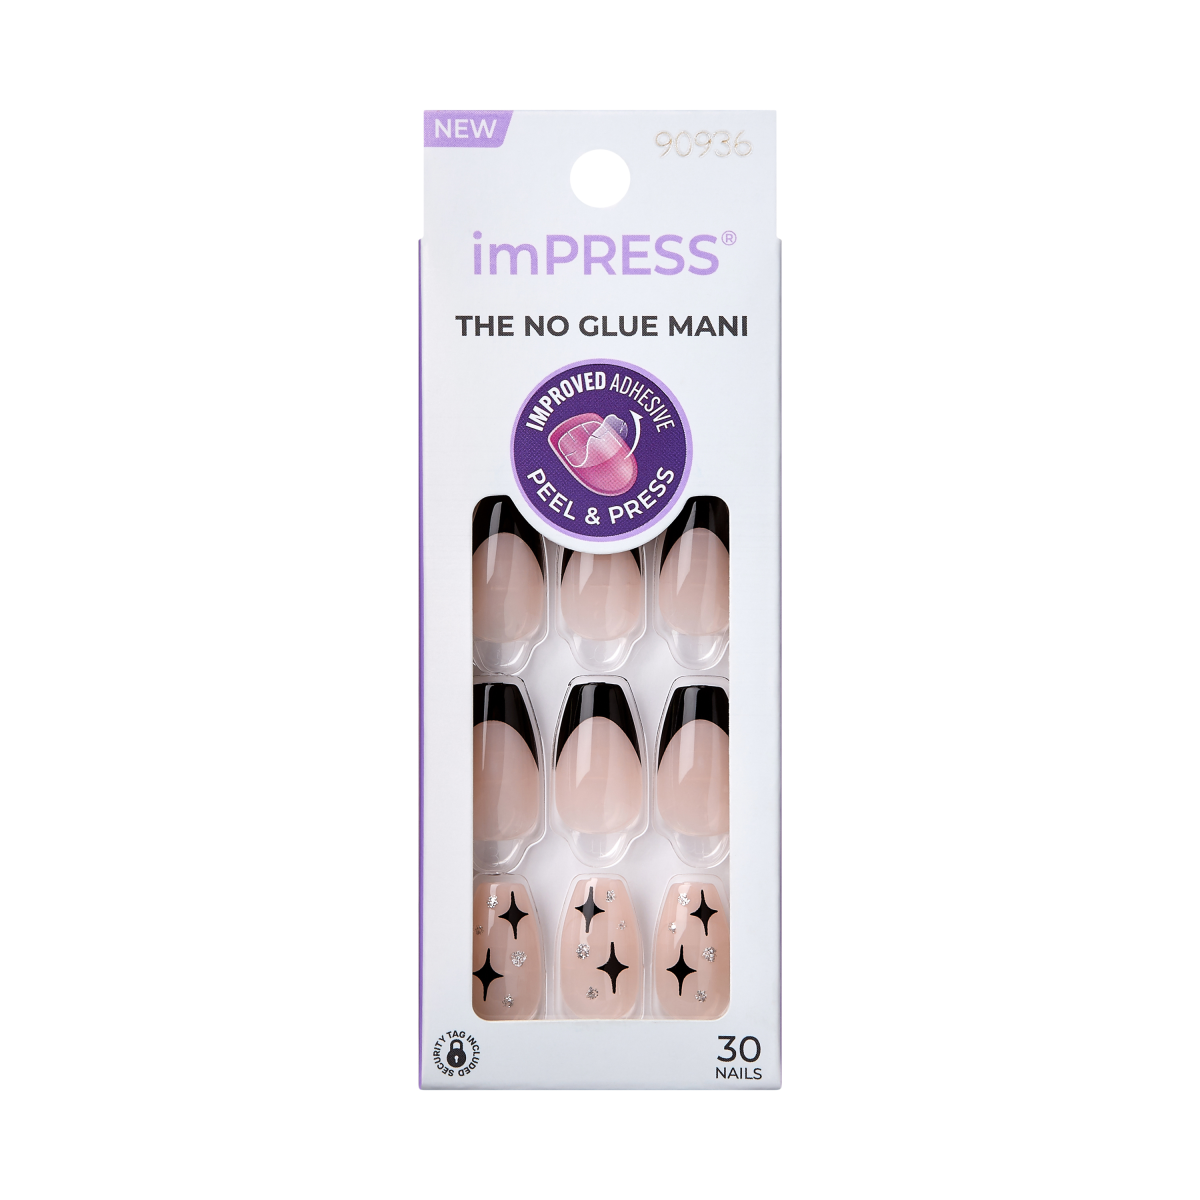 KISS imPRESS No Glue Mani Press On Nails, Design, For the Night, Black, Med Coffin, 30ct